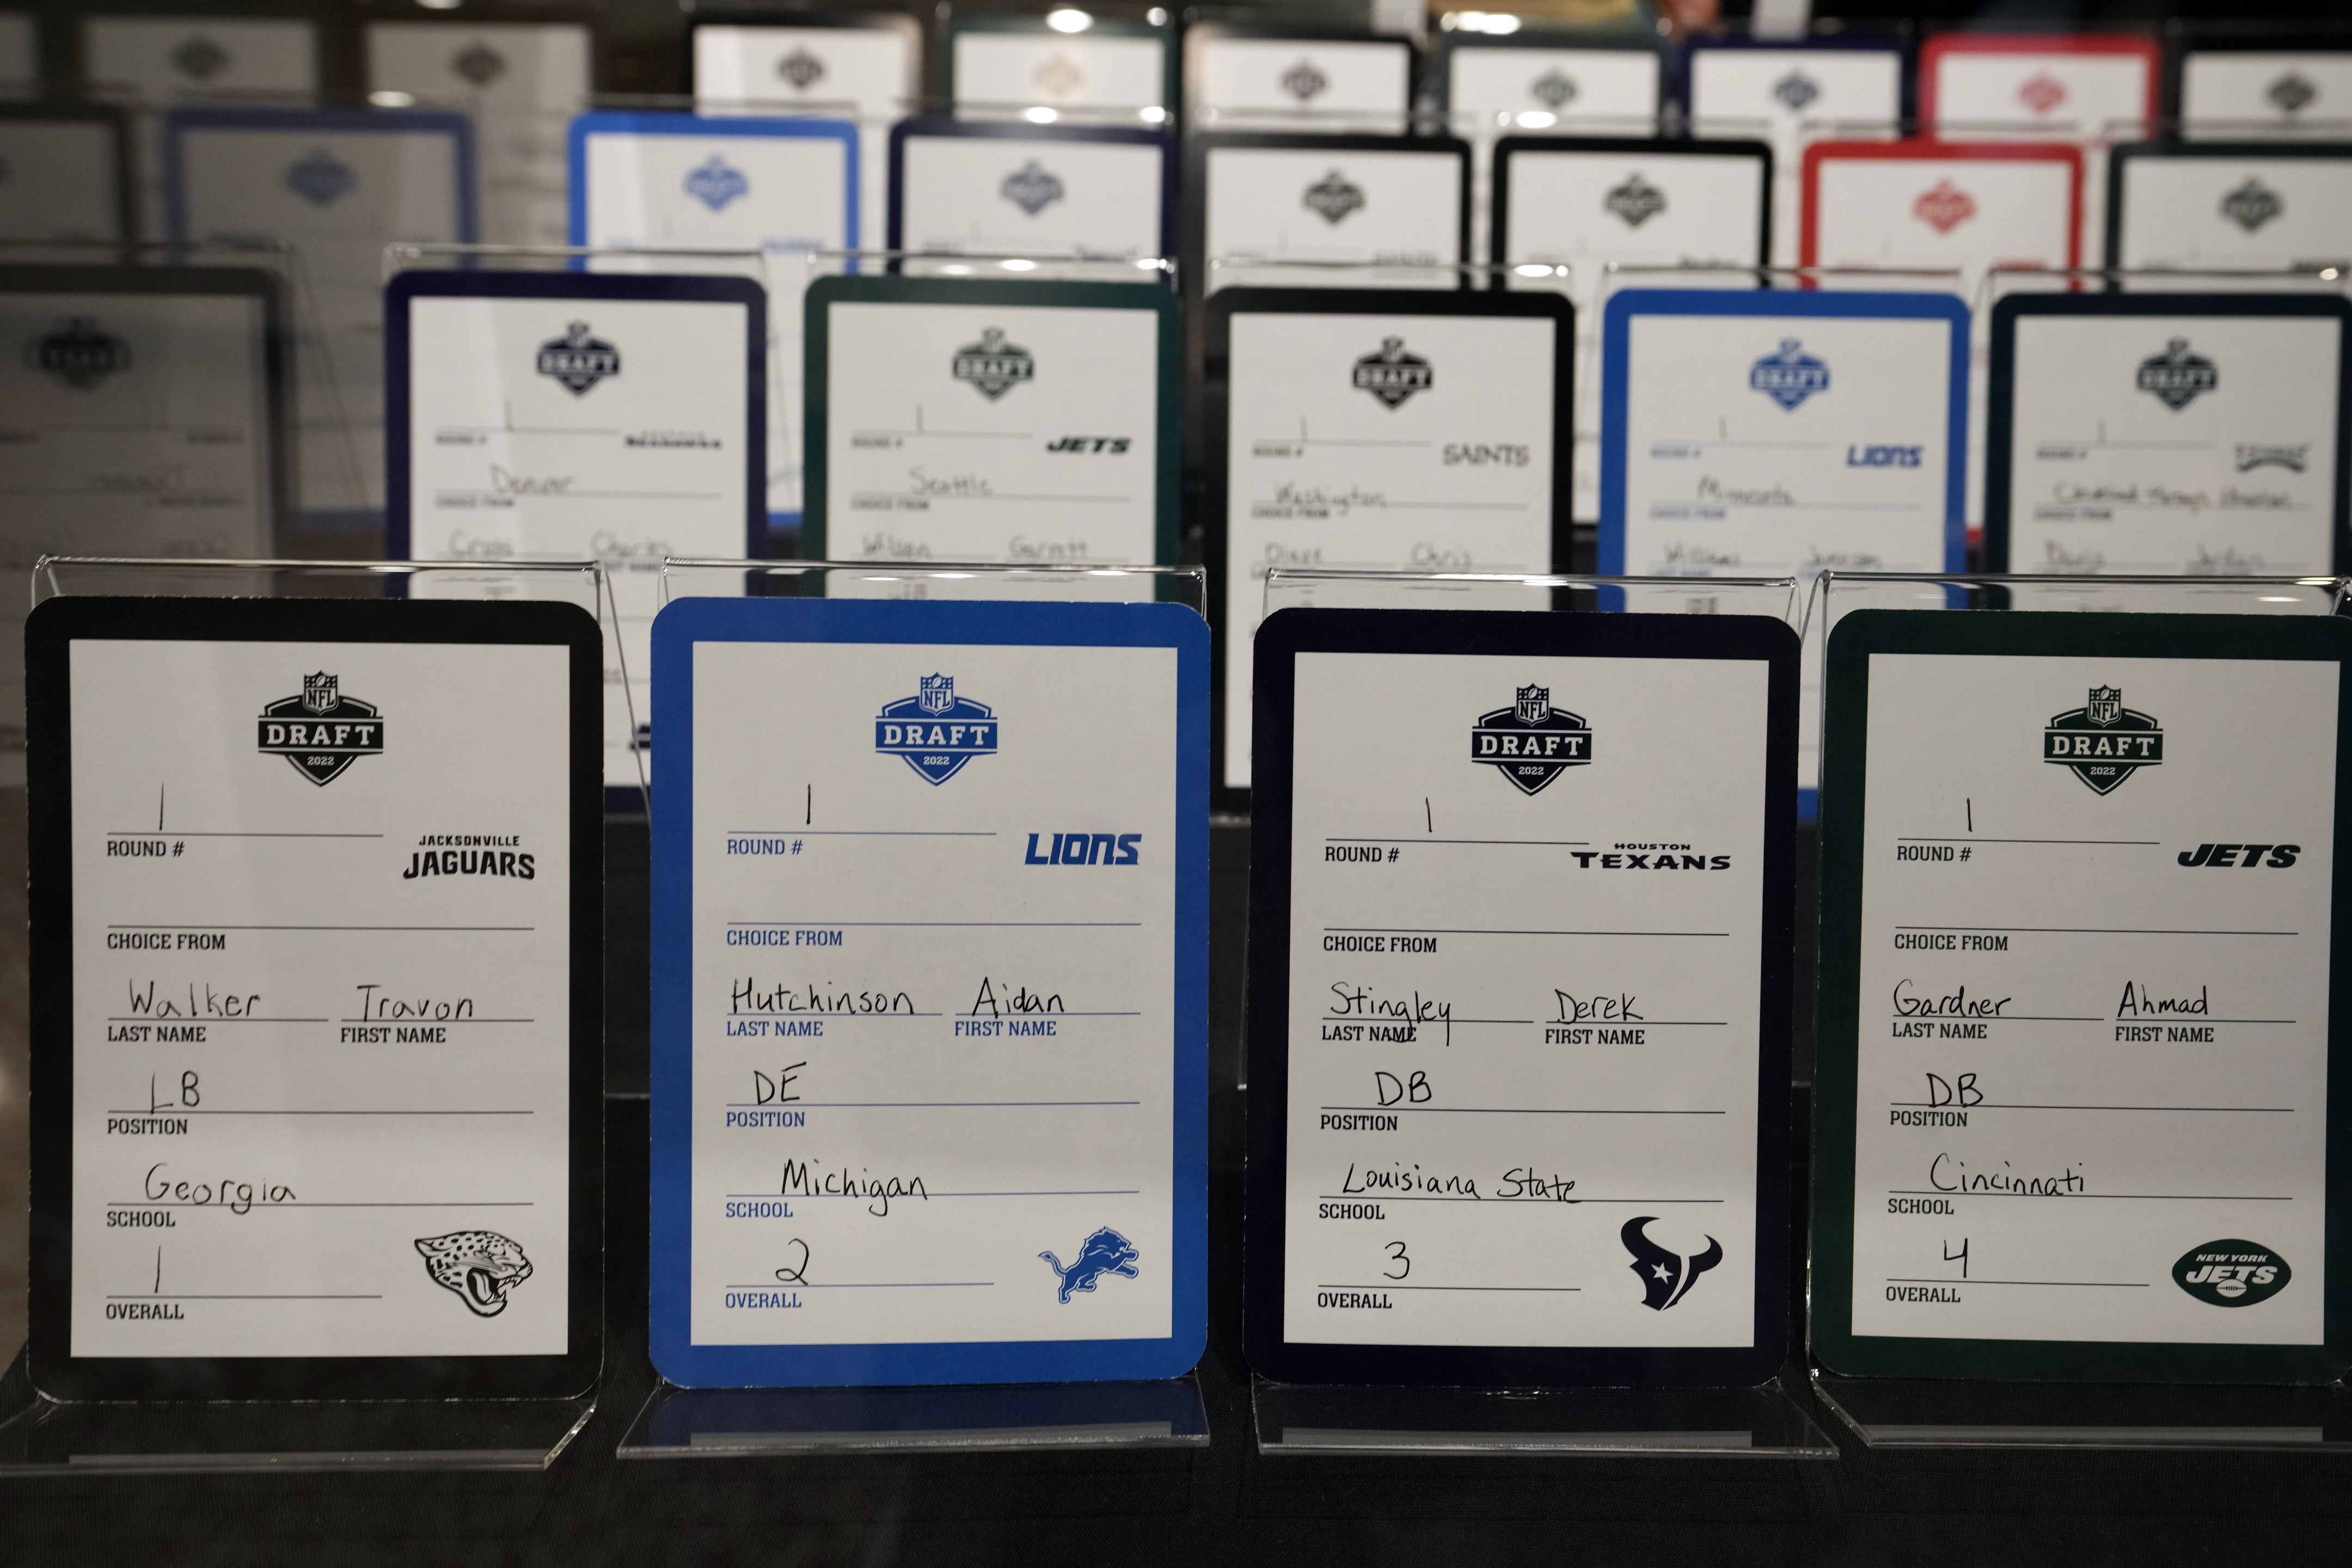 Aug 5, 2022; Canton, OH, USA; The 2022 NFL Draft cards of first-round picks Travon Walker (Jacksonville Jaguars), Aidan Hutchinson (Detroit Lions), Derek Stingley (Texans) and Ahmad Gardner (Jets) on display at the Pro Football Hall of Fame.